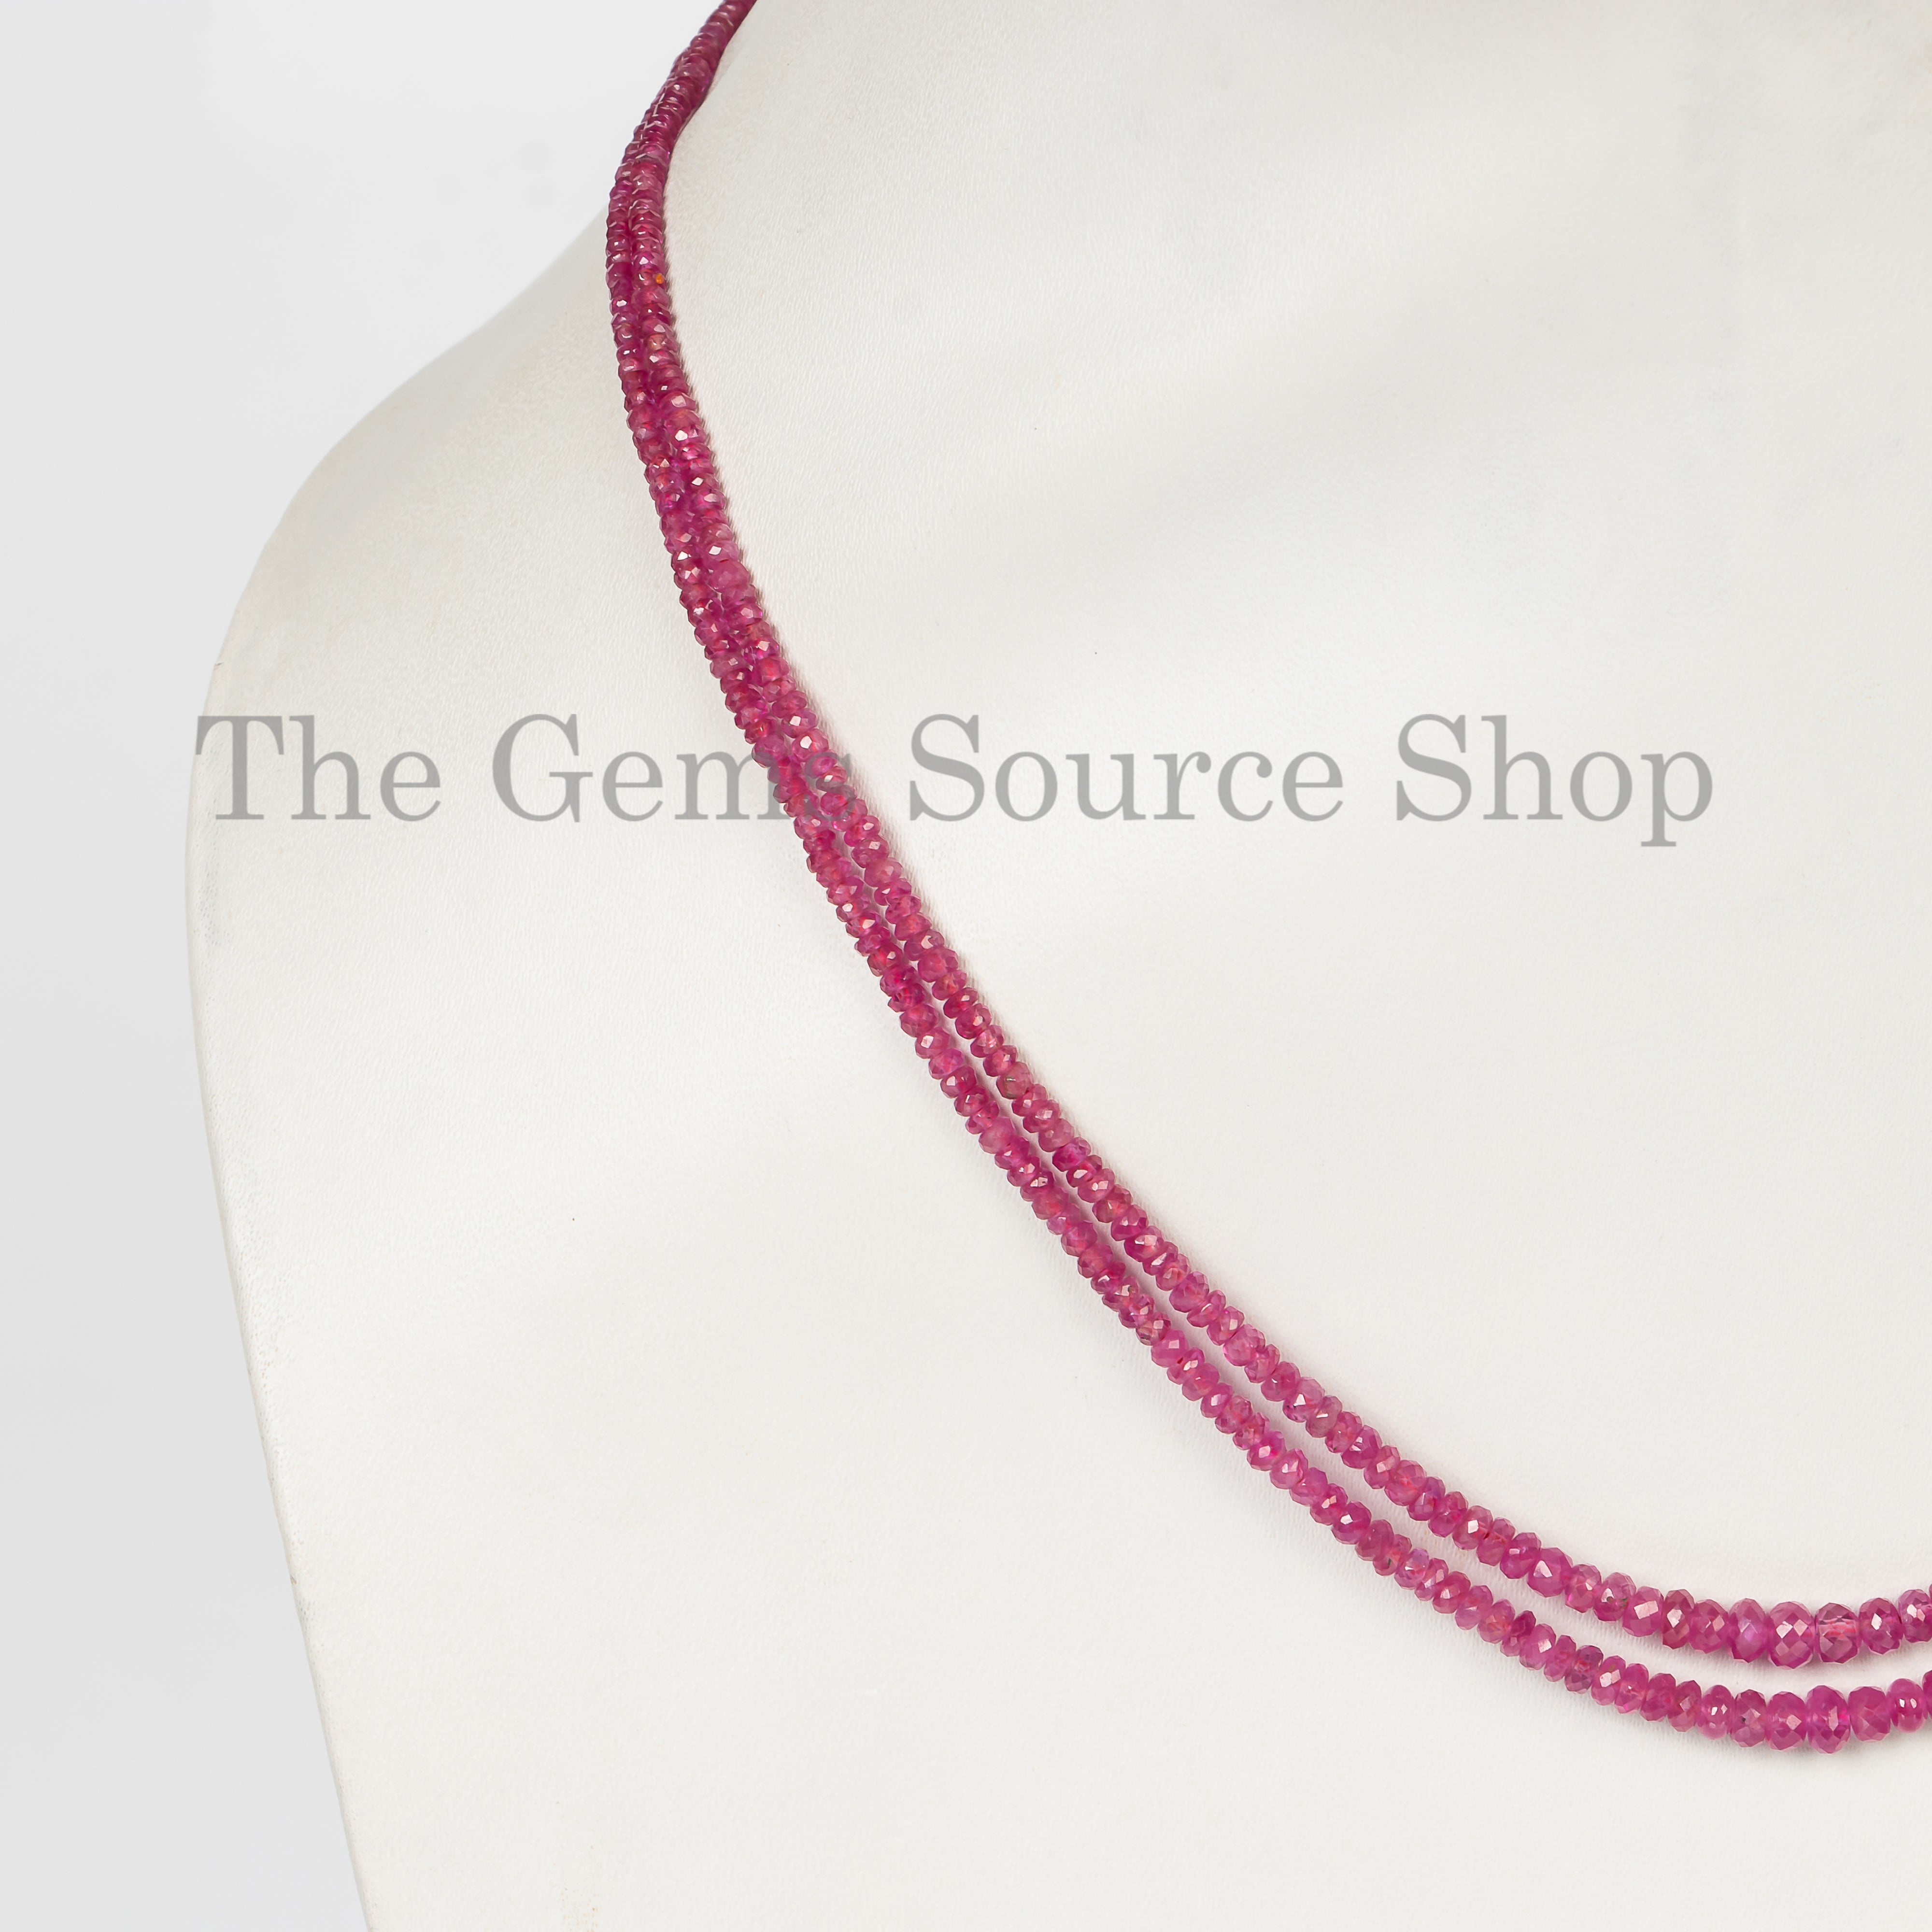 Top Quality Natural Burma Ruby Necklace, Ruby Faceted Rondelle Necklace